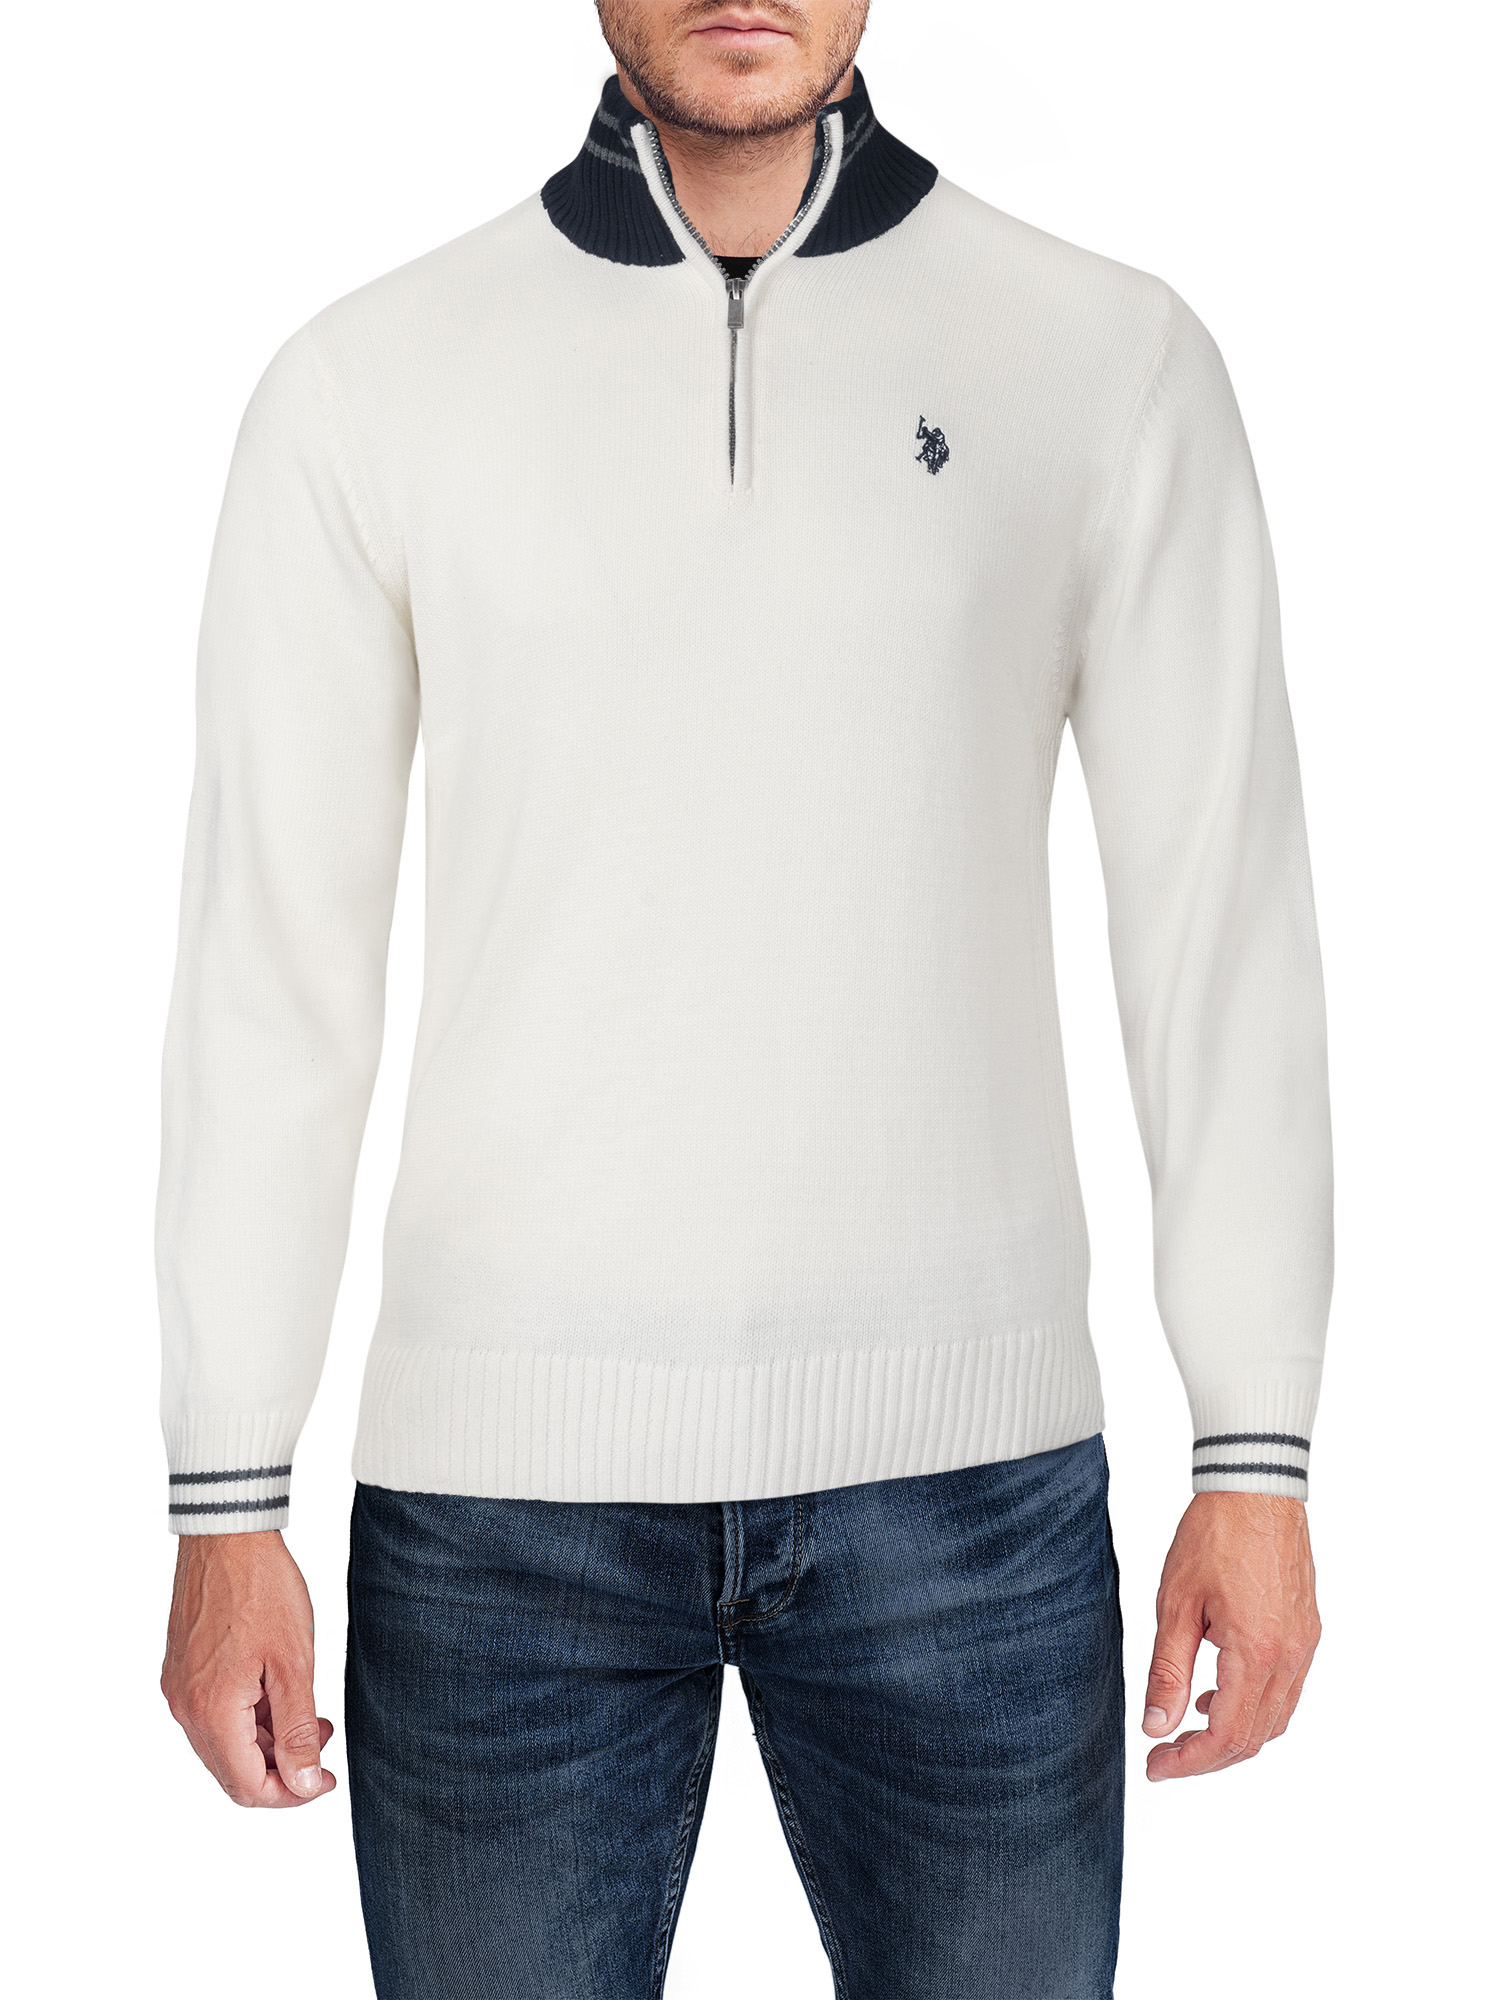 U.S. Polo Assn Men's Quarter Zip Sweater with Contrast Neck - image 1 of 1